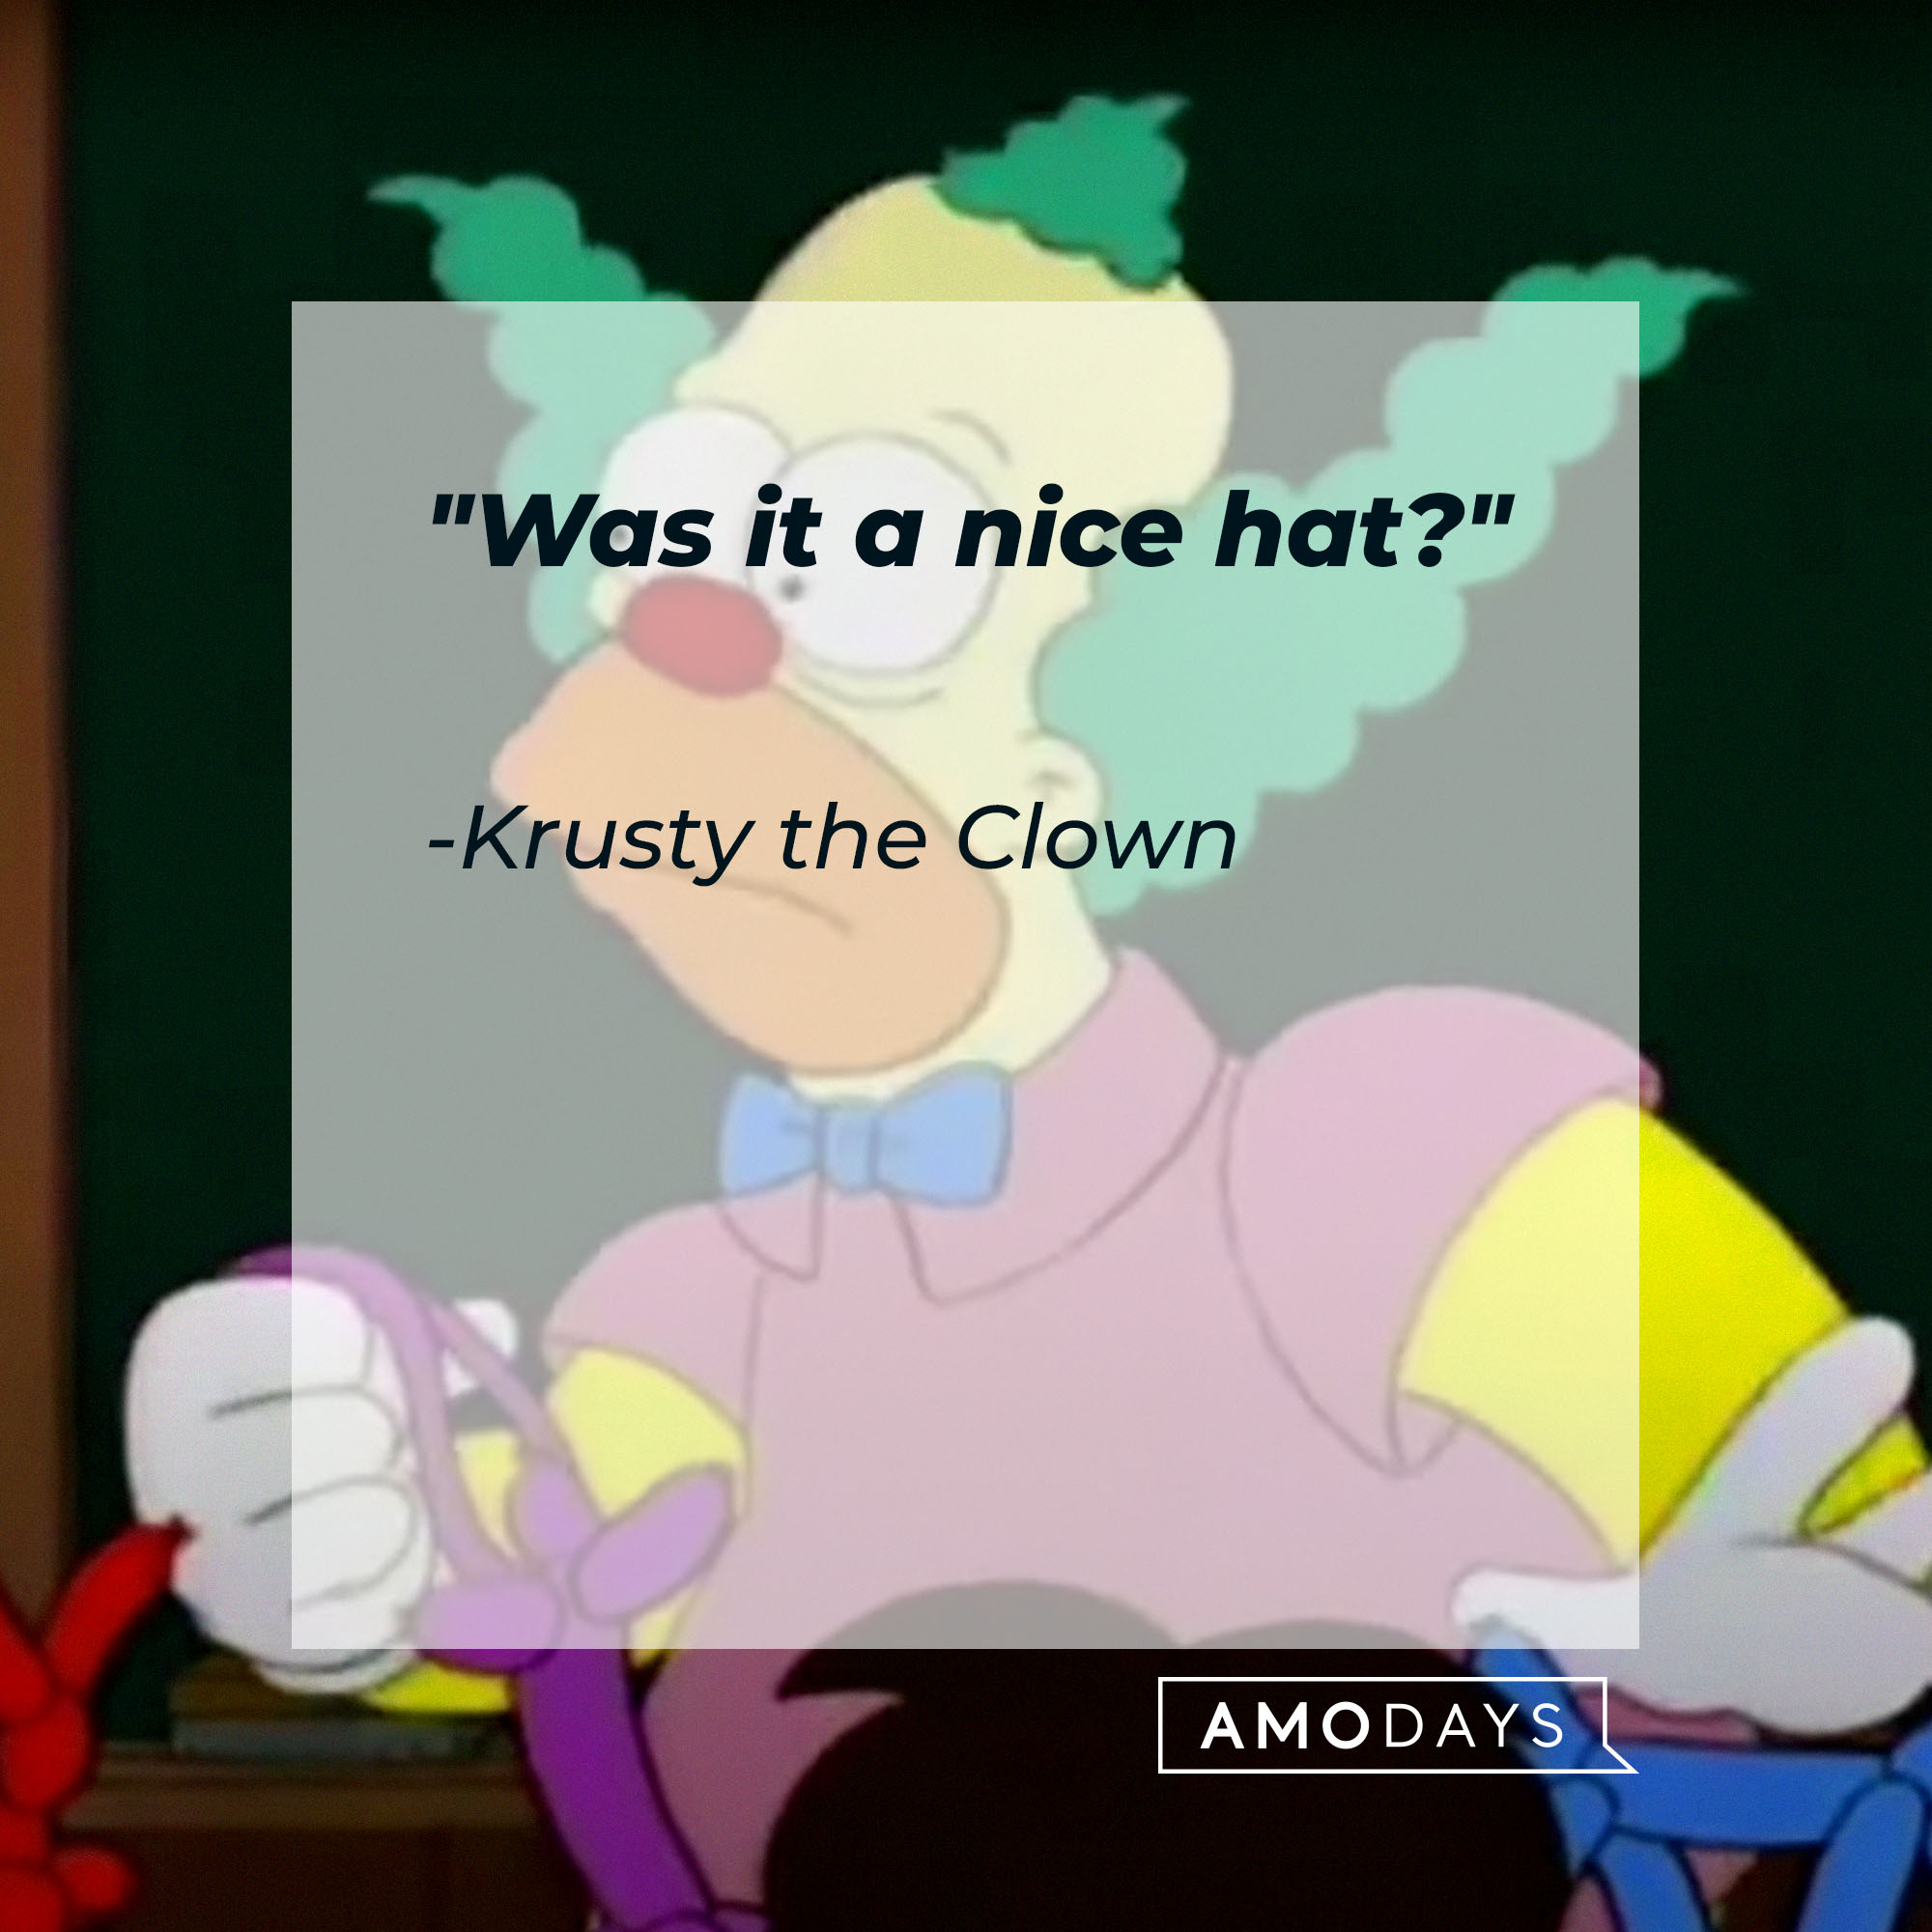 Krusty the Clown's quote: "Was it a nice hat?" | Source: Facebook.com/TheSimpsons